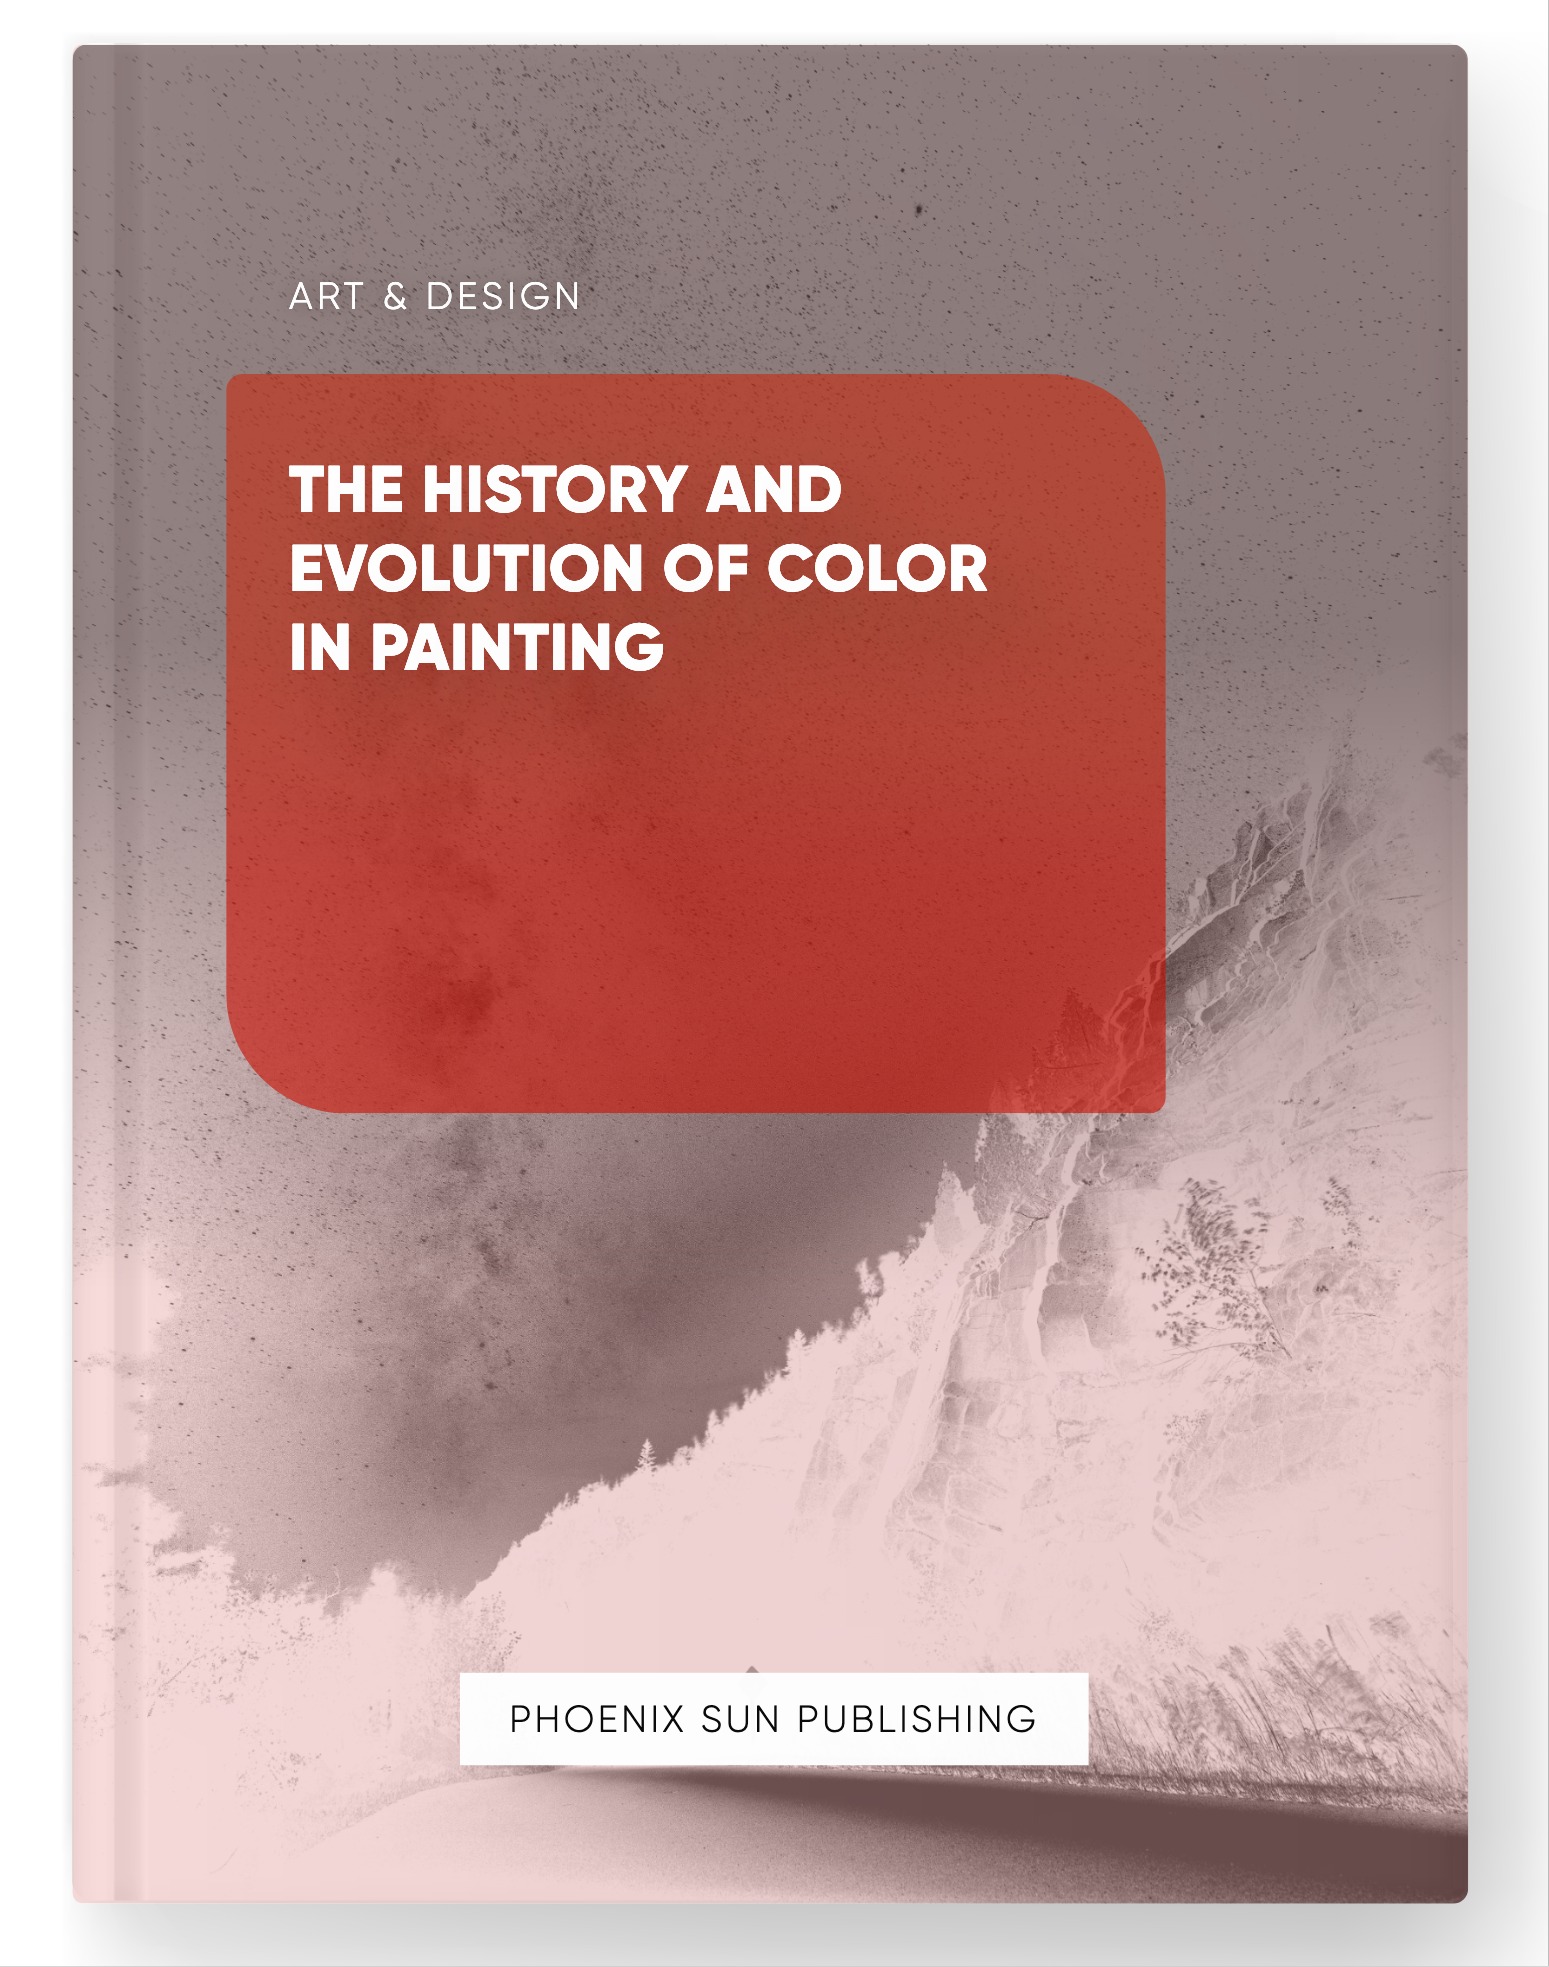 The History and Evolution of Color in Painting